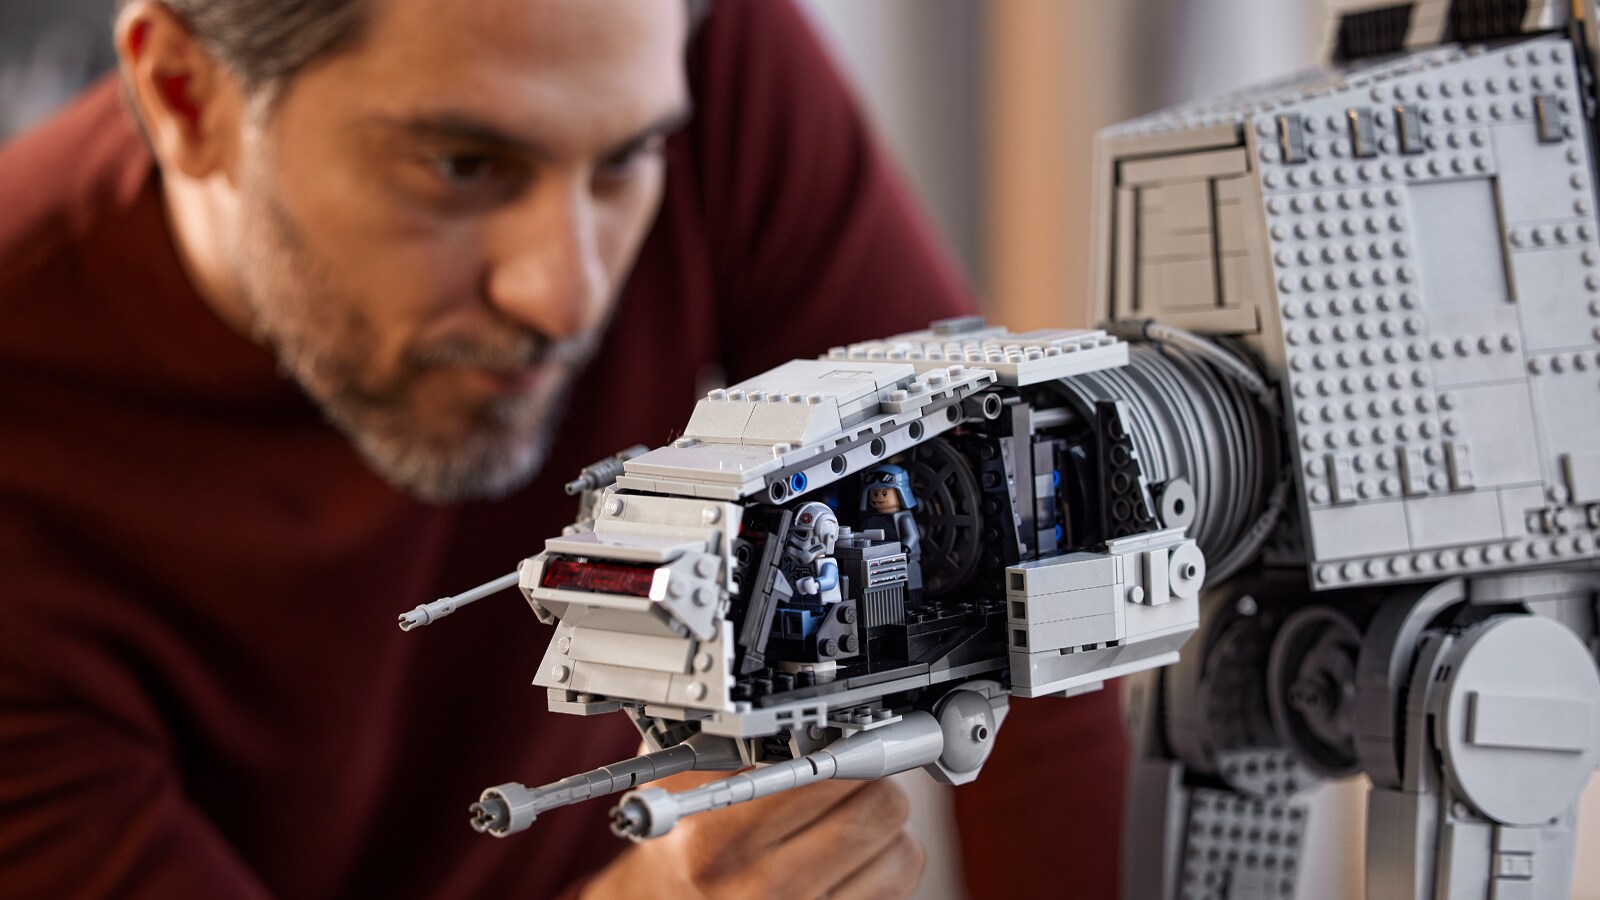 10 Great LEGO Star Wars Building Sets for Adults | StarWars.com